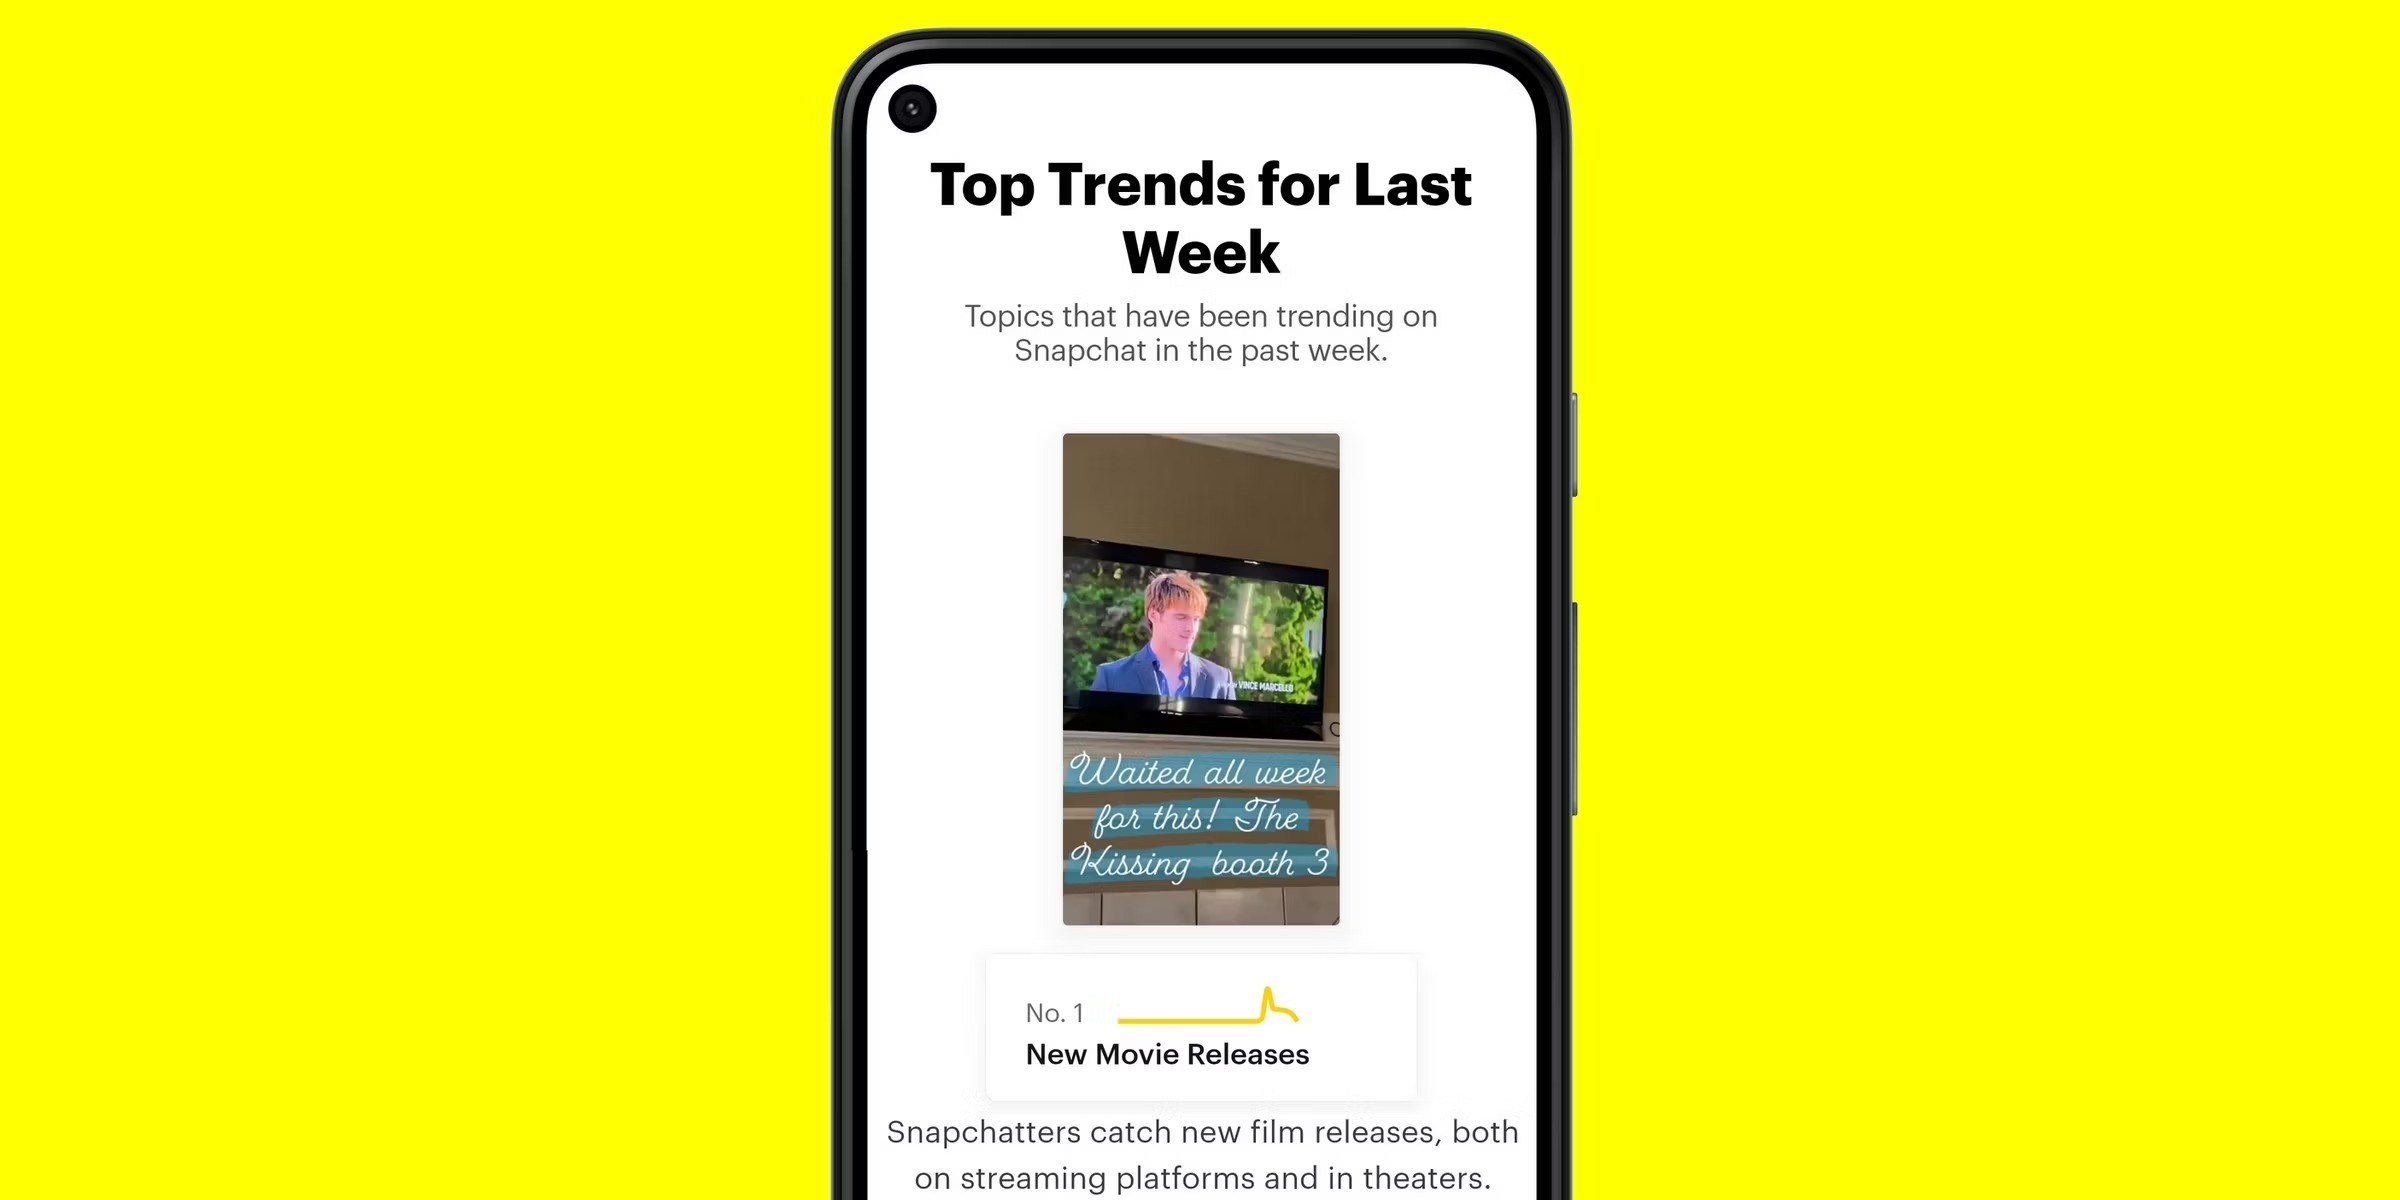 Snapchat Trends You Should Know About